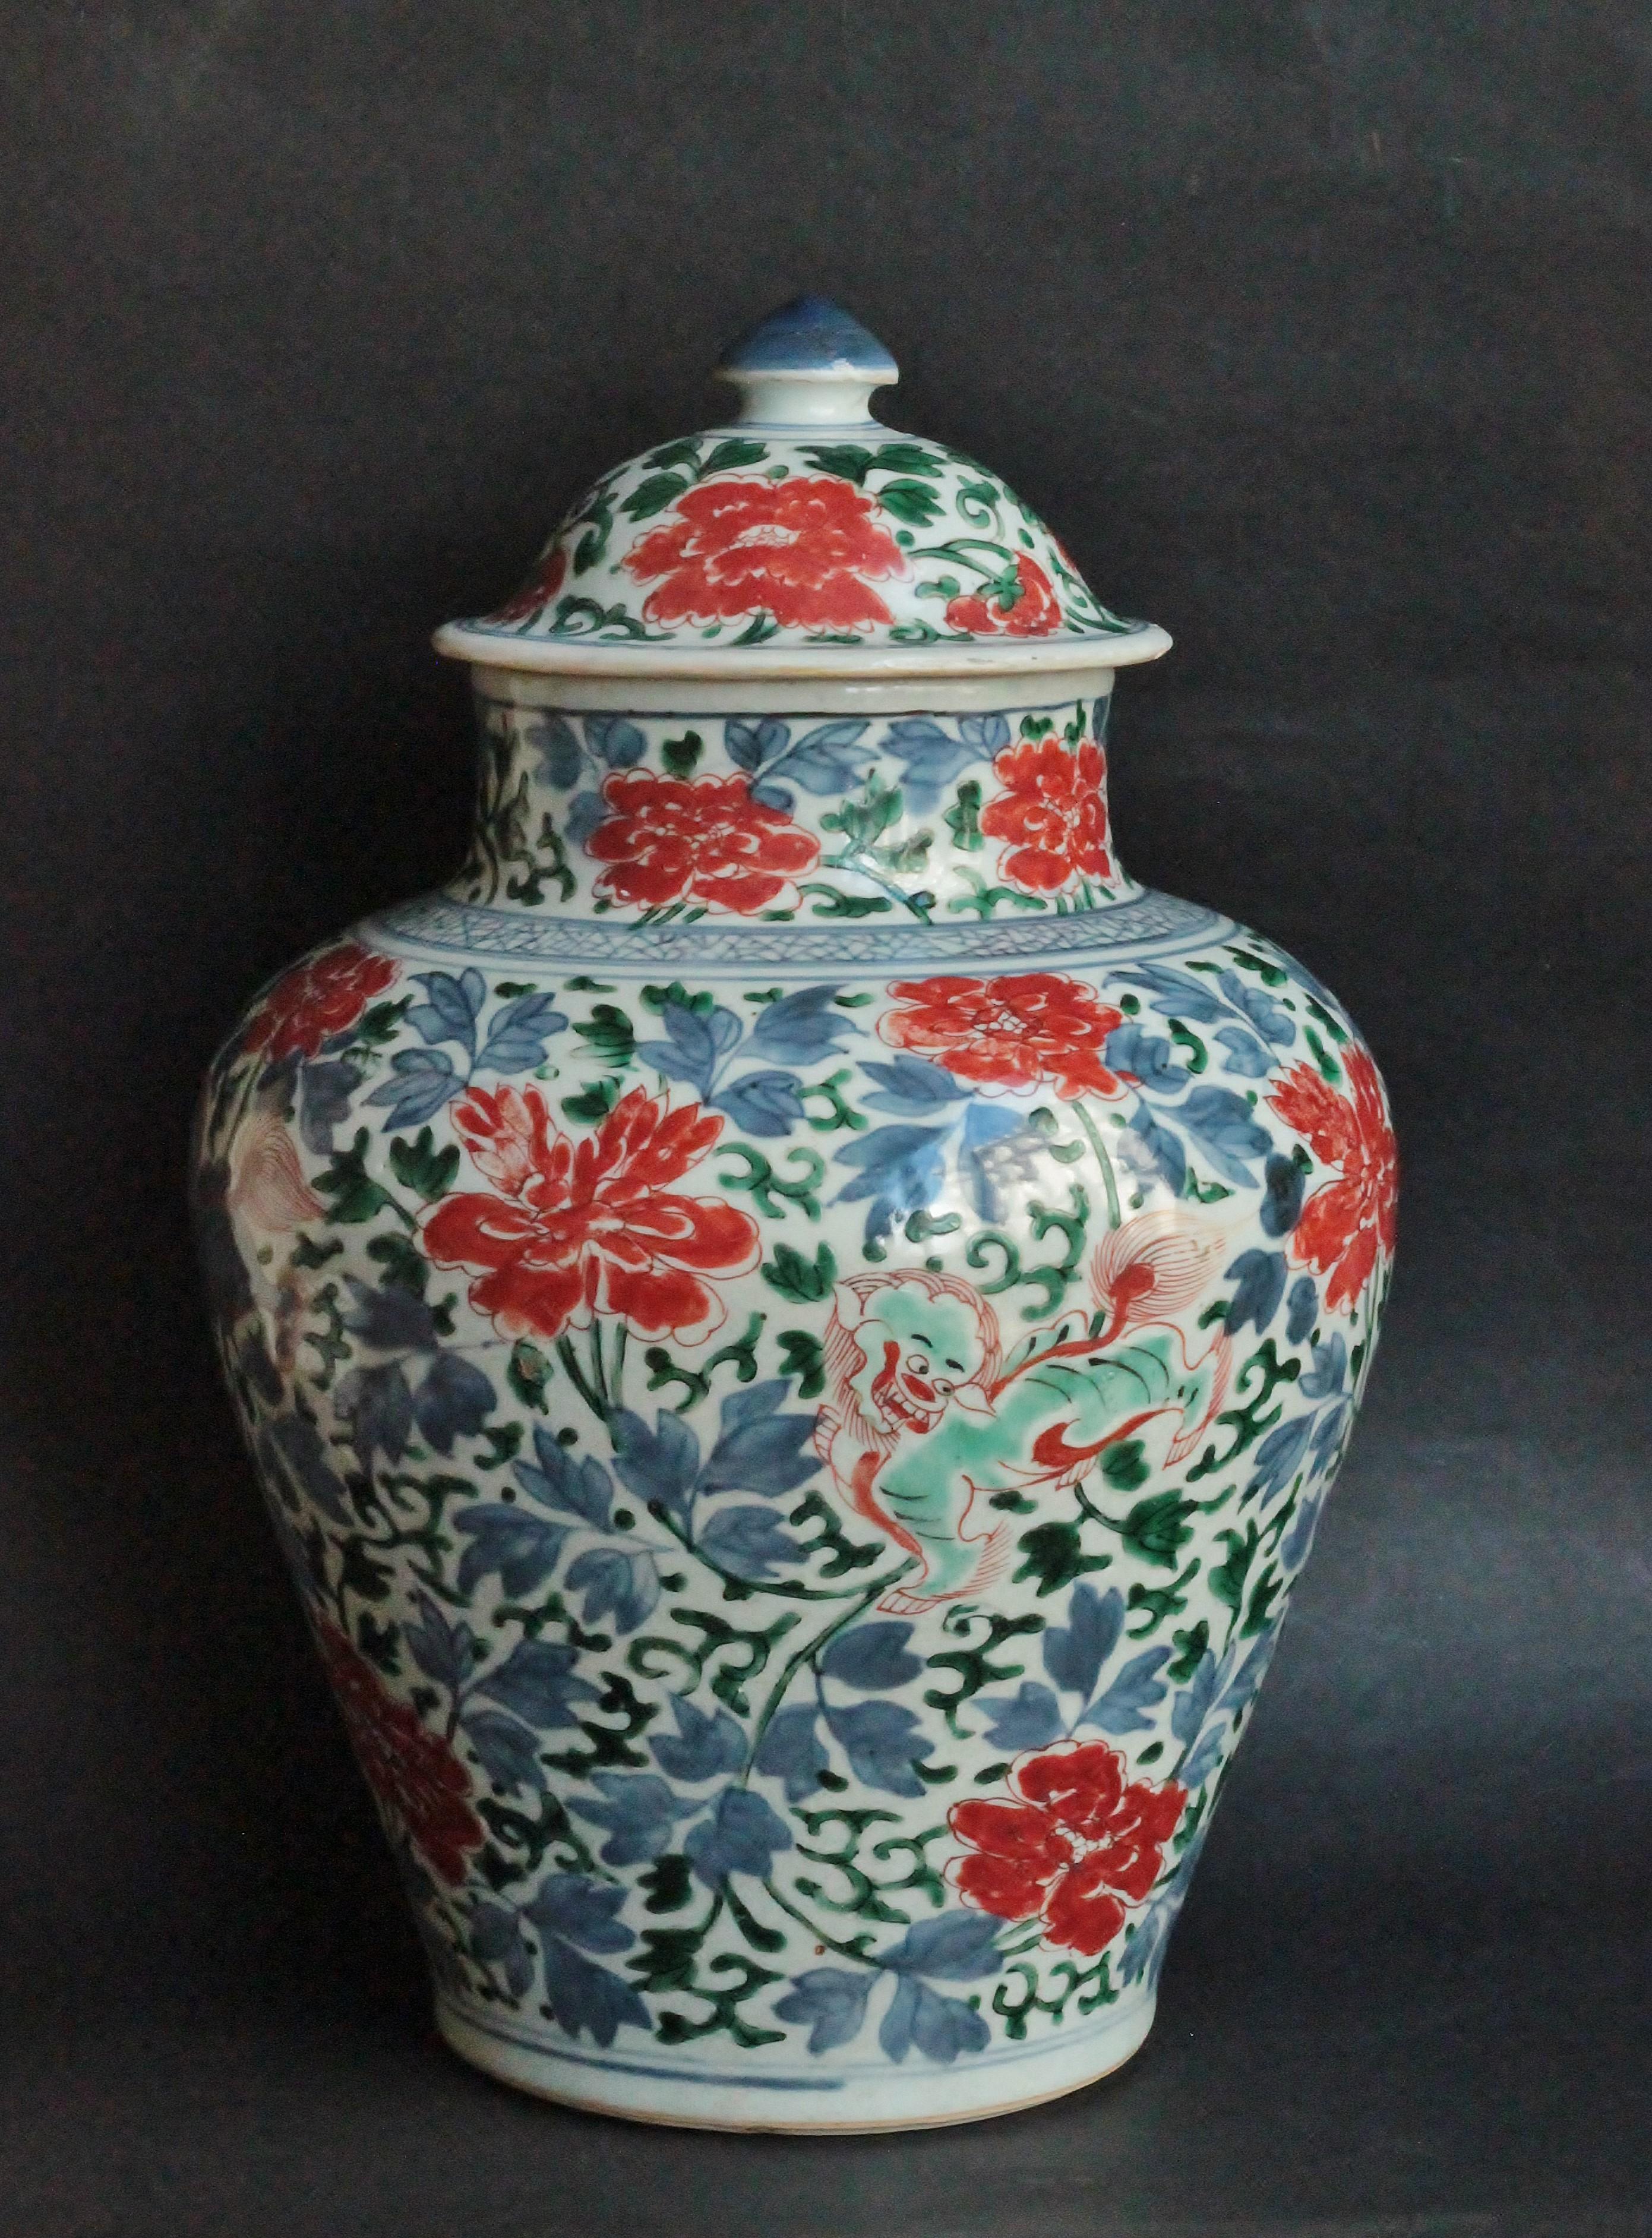 A jar and cover in China porcelain with a polychrome decoration (‘Wucai’ enamel) of “shi-shi” on a ground of chrysanthemum and lotus flower.
Transition period, Shunzhi (1644-1661), 17th century.
Measures: Height 36.5 cm; diameter 24 cm
Two little